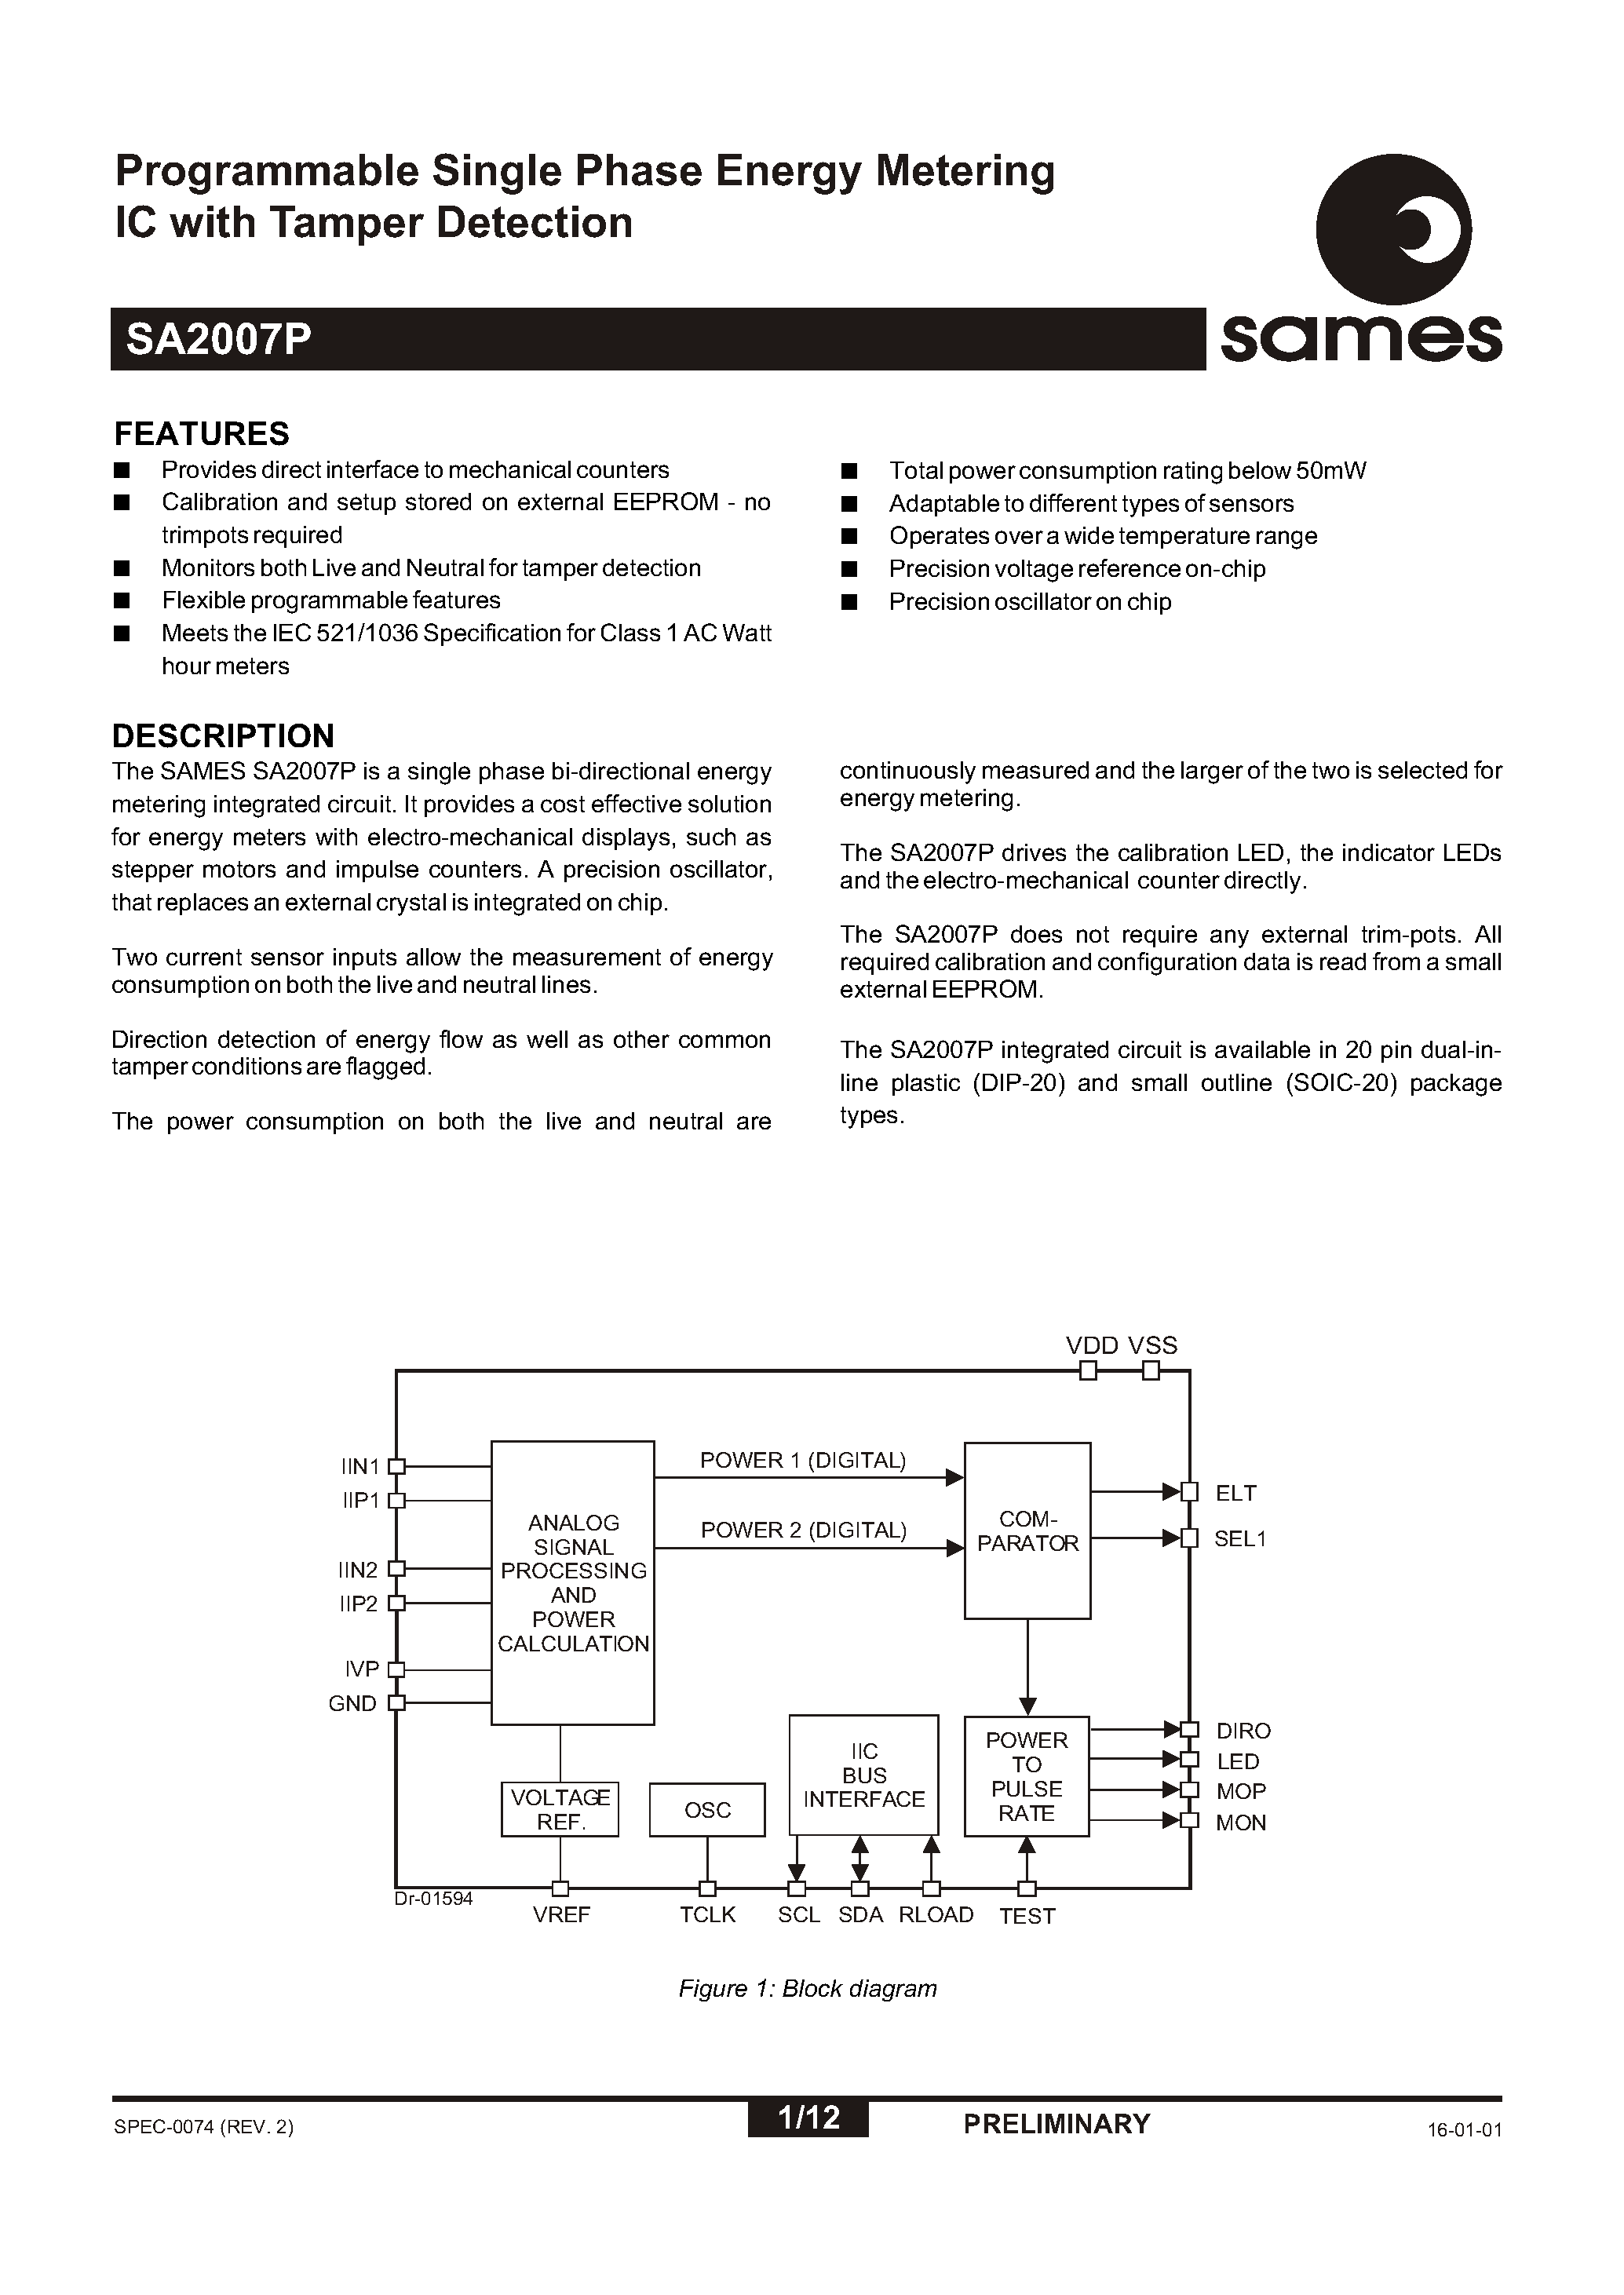 Datasheet SA2007P - Programmable Single Phase Energy Metering IC with Tamper Detection page 1